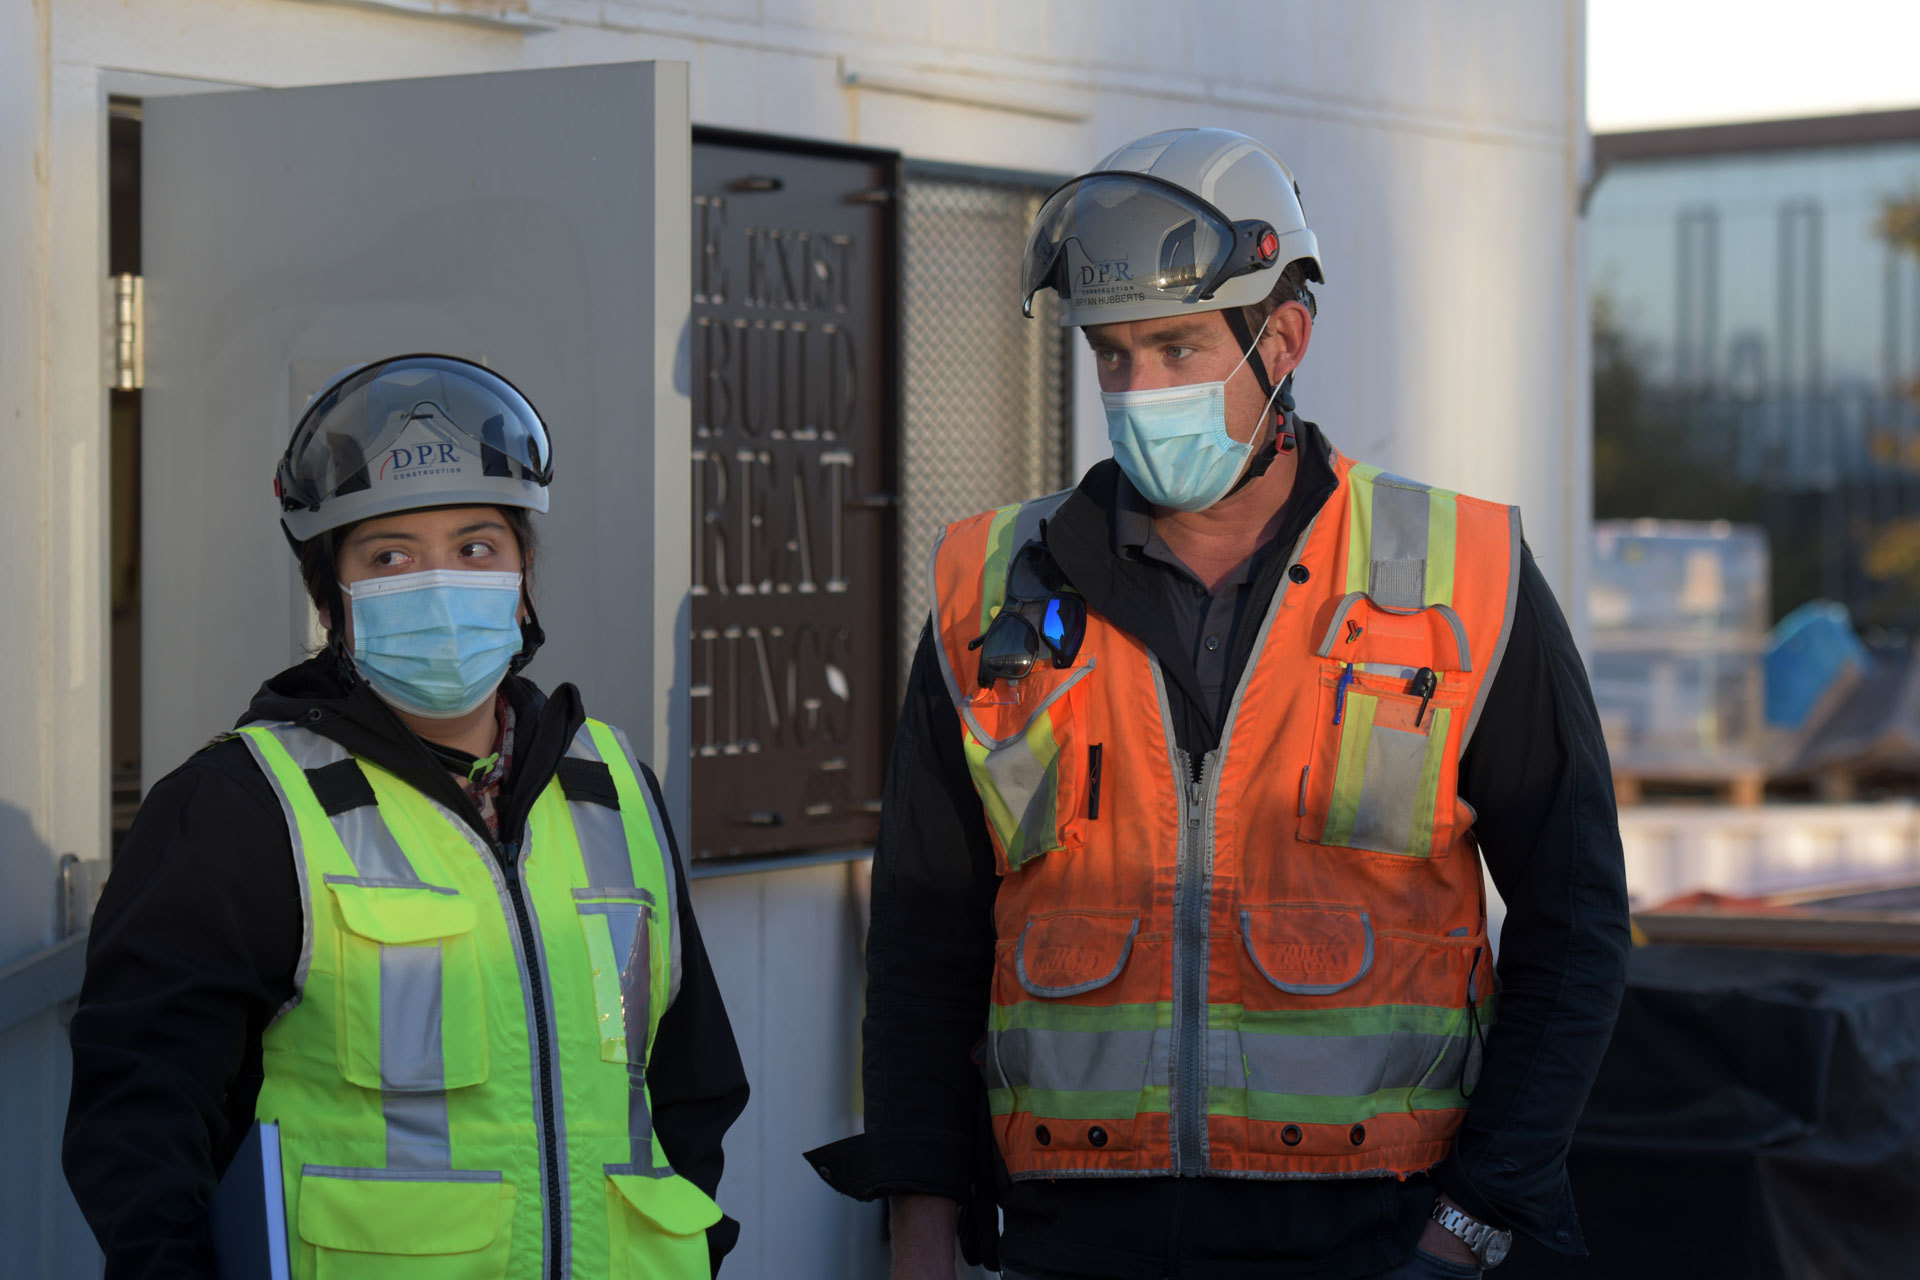 Two DPR employees in full safety gear take part in a morning meeting before the beginning of the workday.